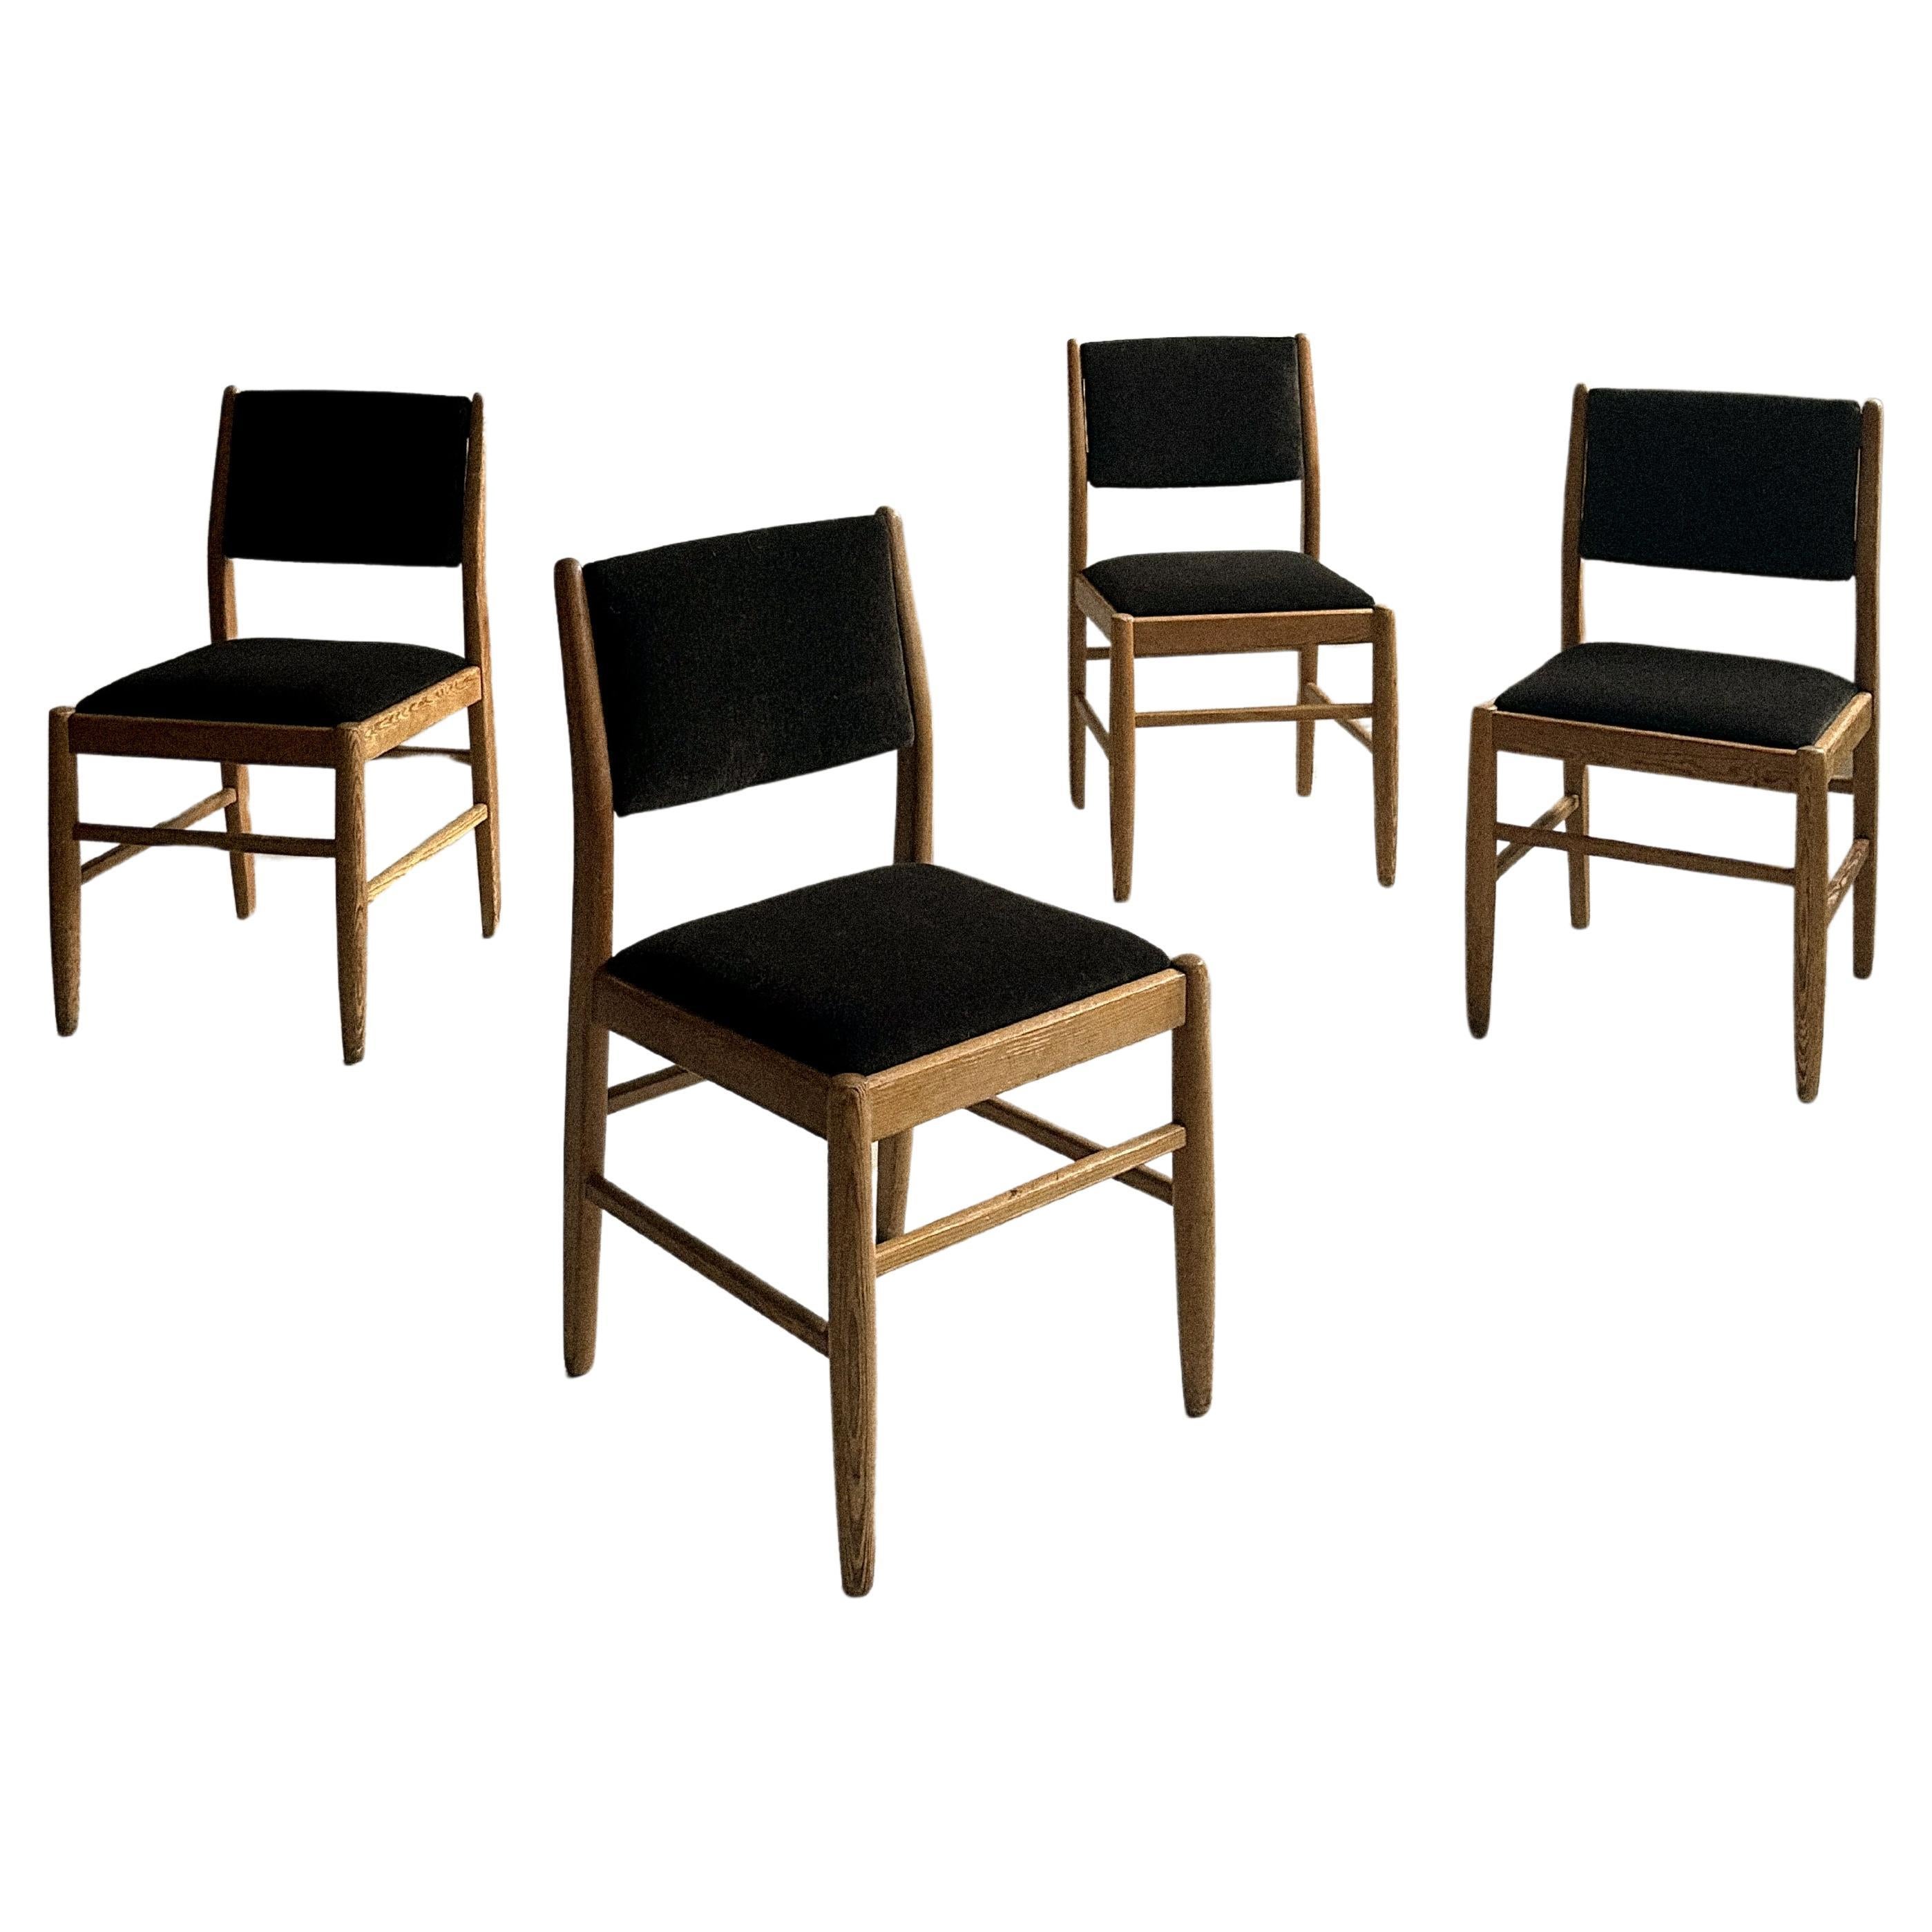 A Set of 4 Dining Chairs, Pine and Wool Velour, Scandinavia, c. 1960s  For Sale